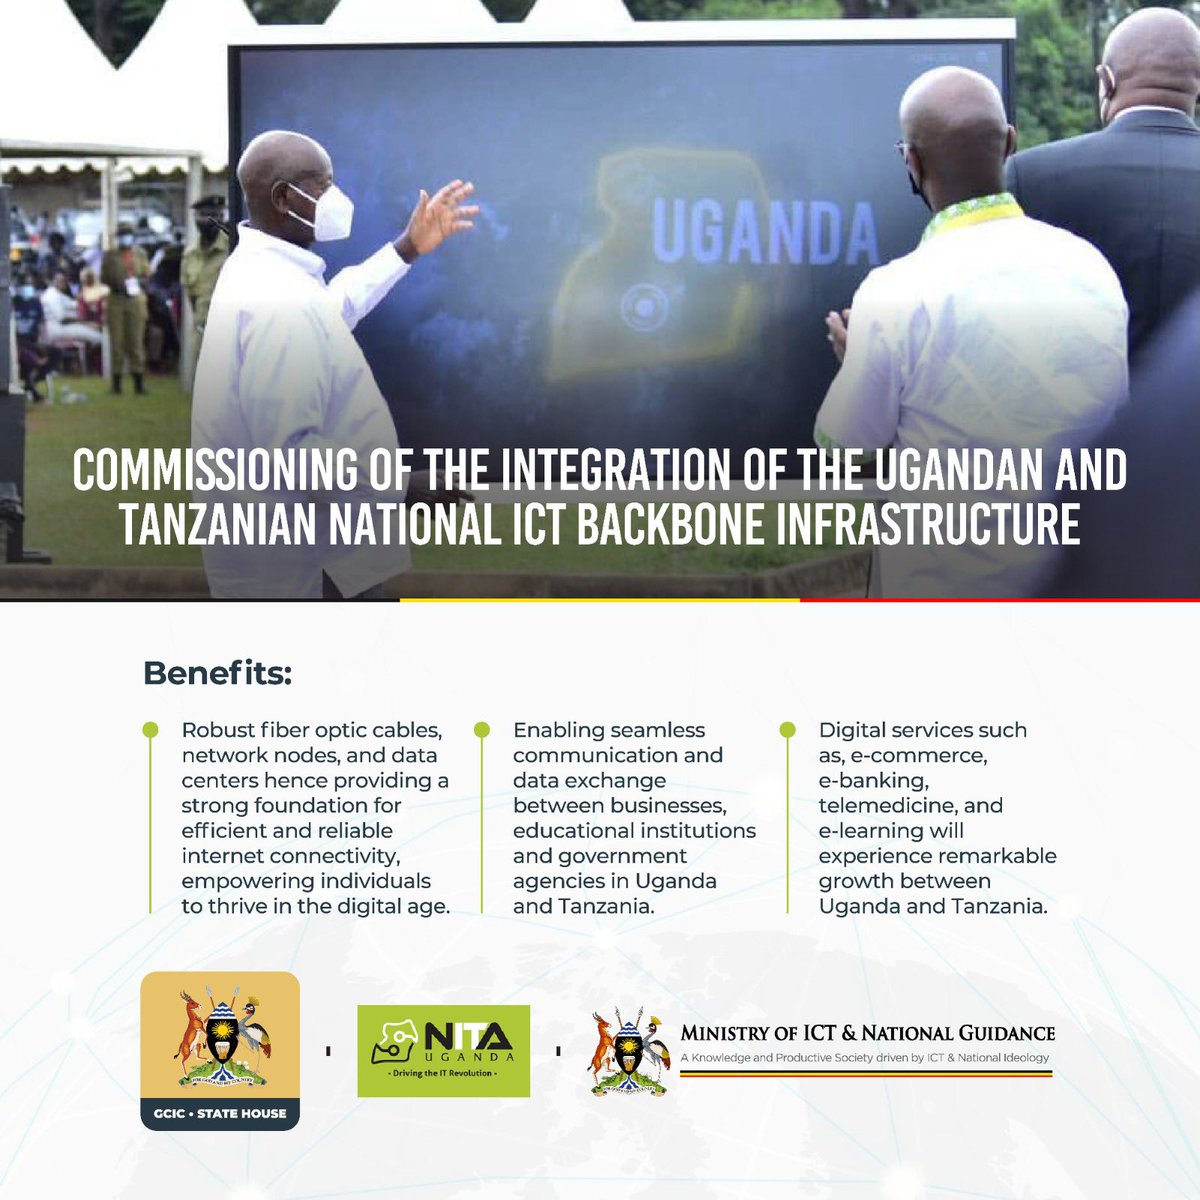 BENEFITS #DigitizeUg @NITAUganda1 
📌 Fiber optic cables provide reliable internet connectivity.
📌 Enabling seamless communication and data exchange between Uganda and Tanzania.
📌 Digital services are expected to grow between Uganda and Tanzania.